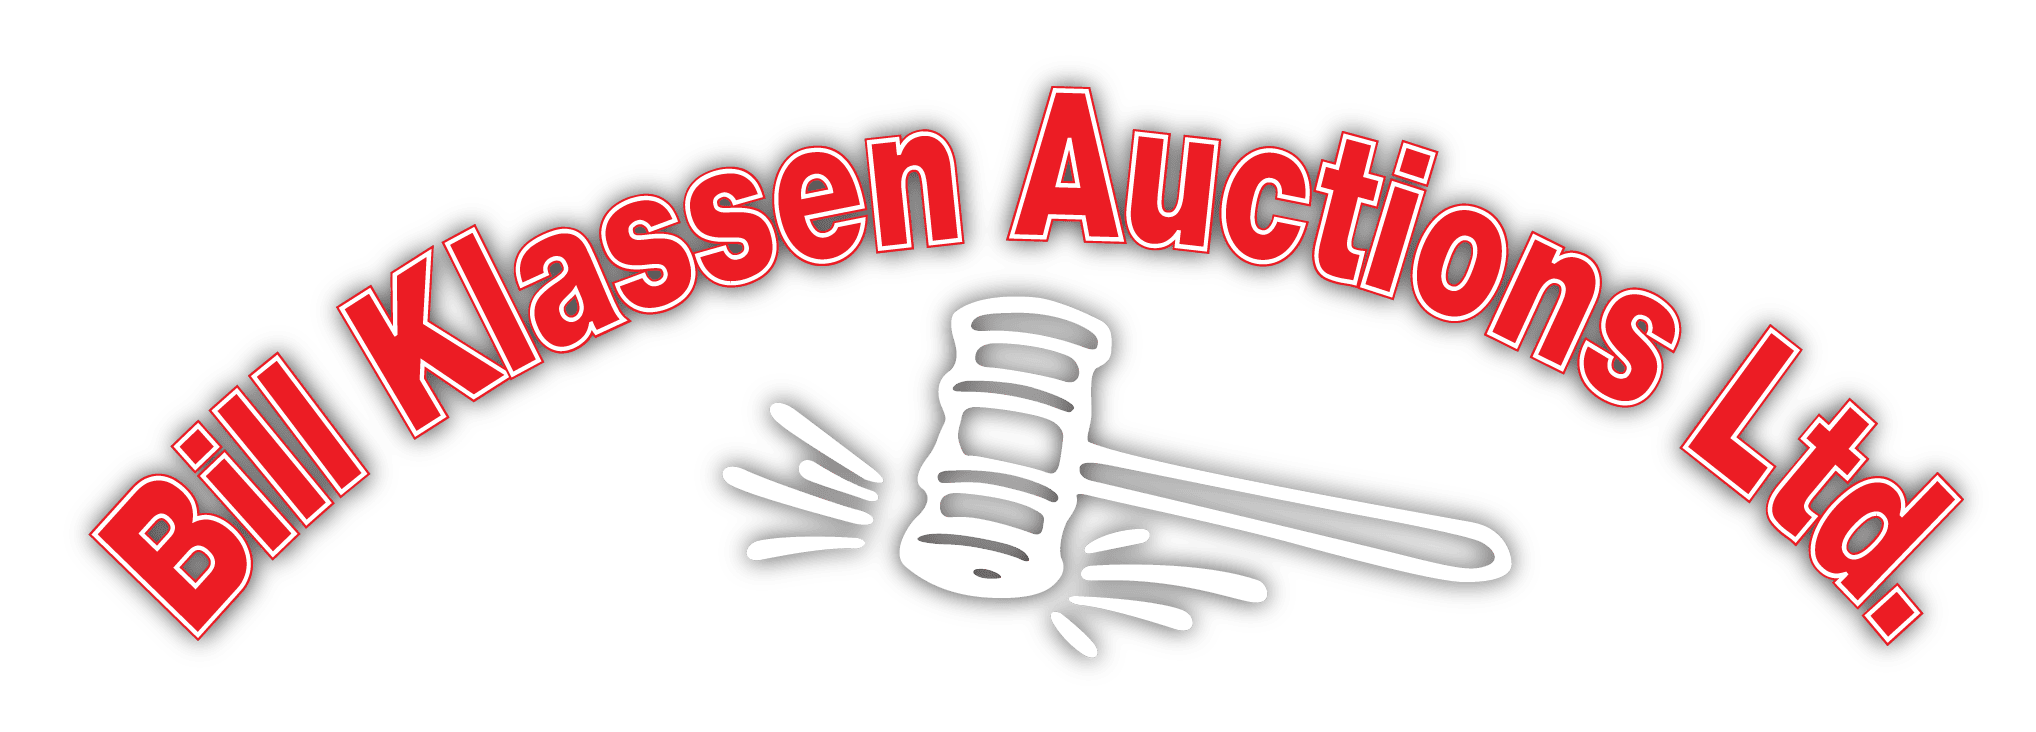 Bill Klassen Auctions I Over 50 Years of Auction Marketing